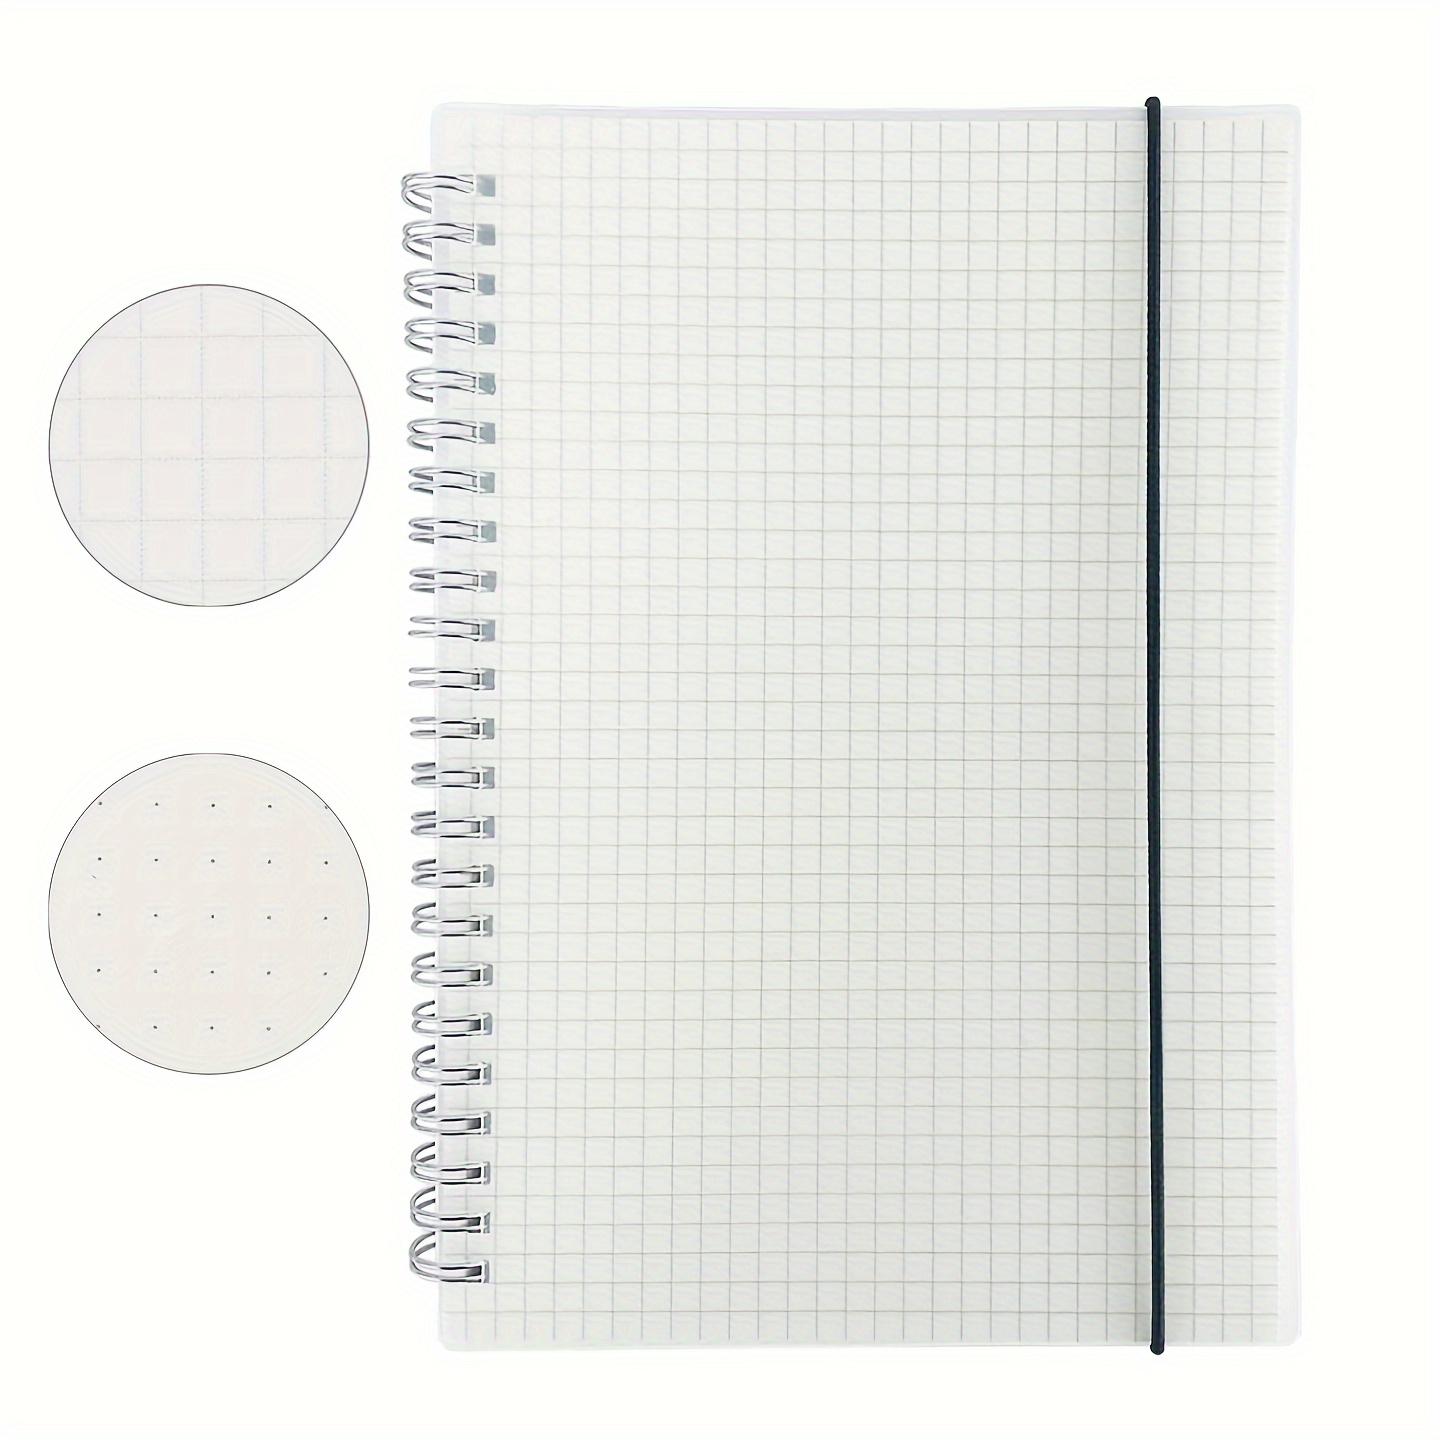 Notebook Dot Grid: Large (8.5 x 11 inches) - 200 Dotted Pages, dot grid  notebook, craft paper background, dotted paper, dot grid notebook for school